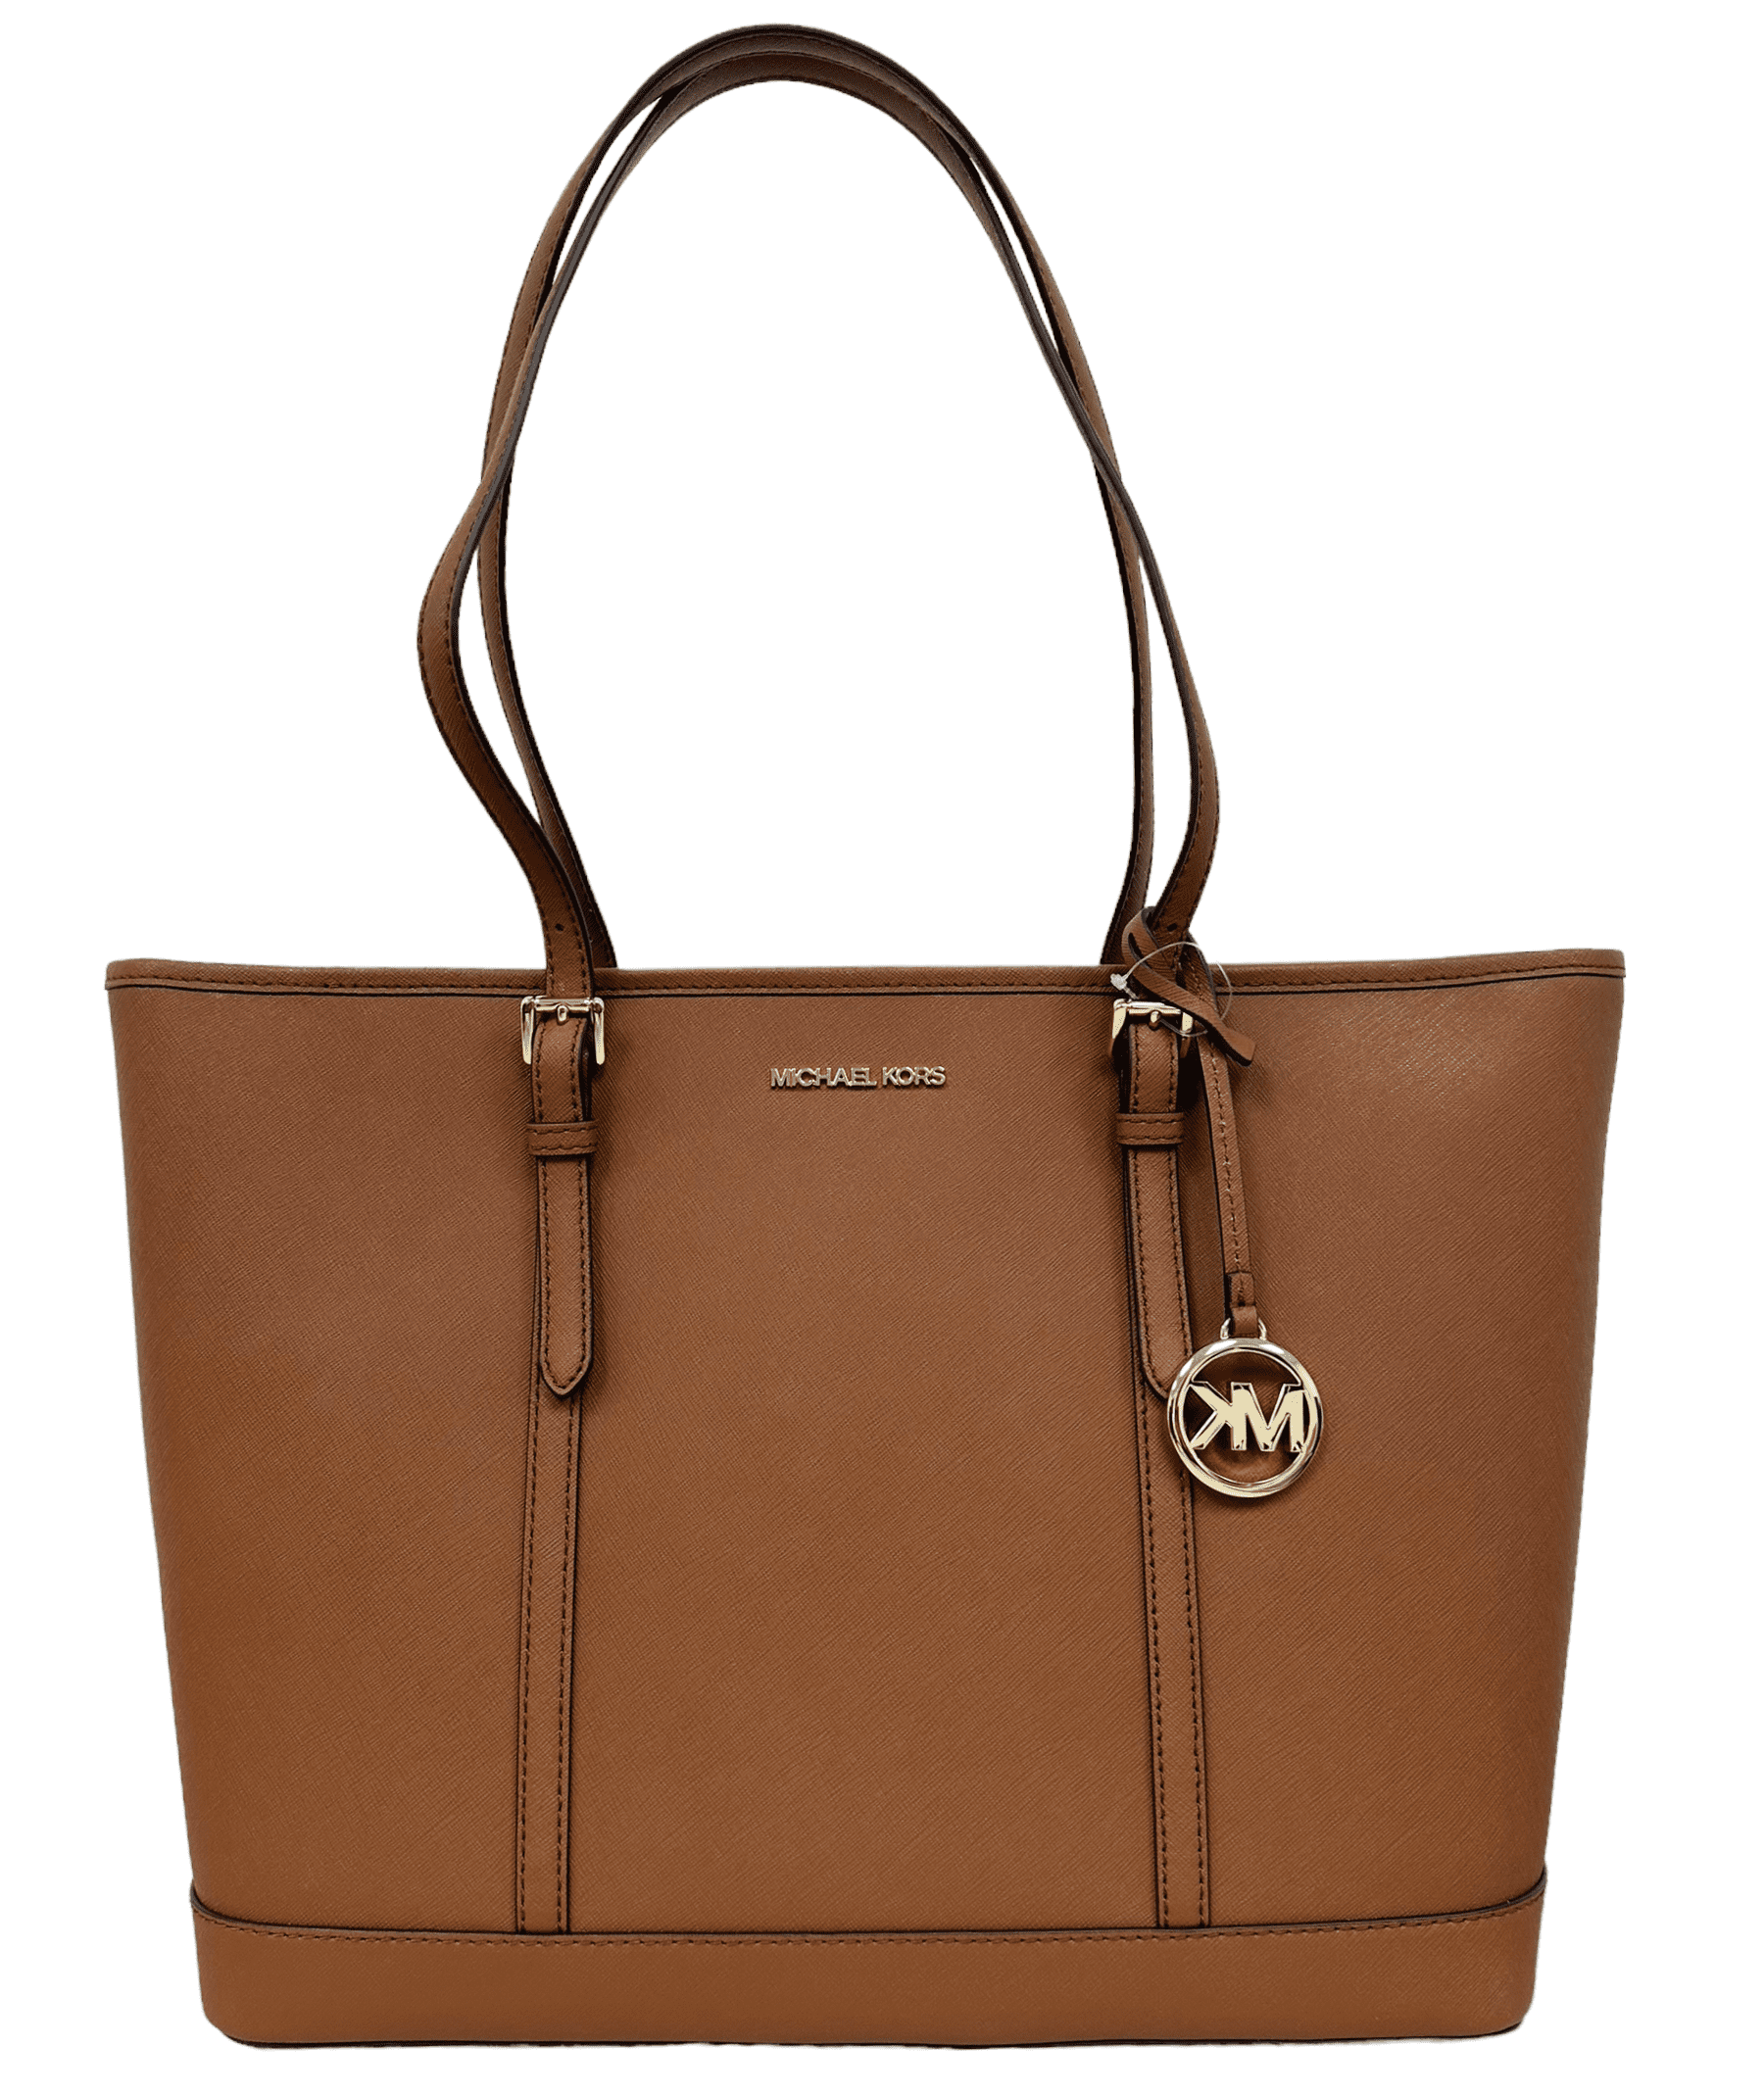 NWT Michael Kors Jet Set Travel Large Saffiano North/South Tote - Luggage